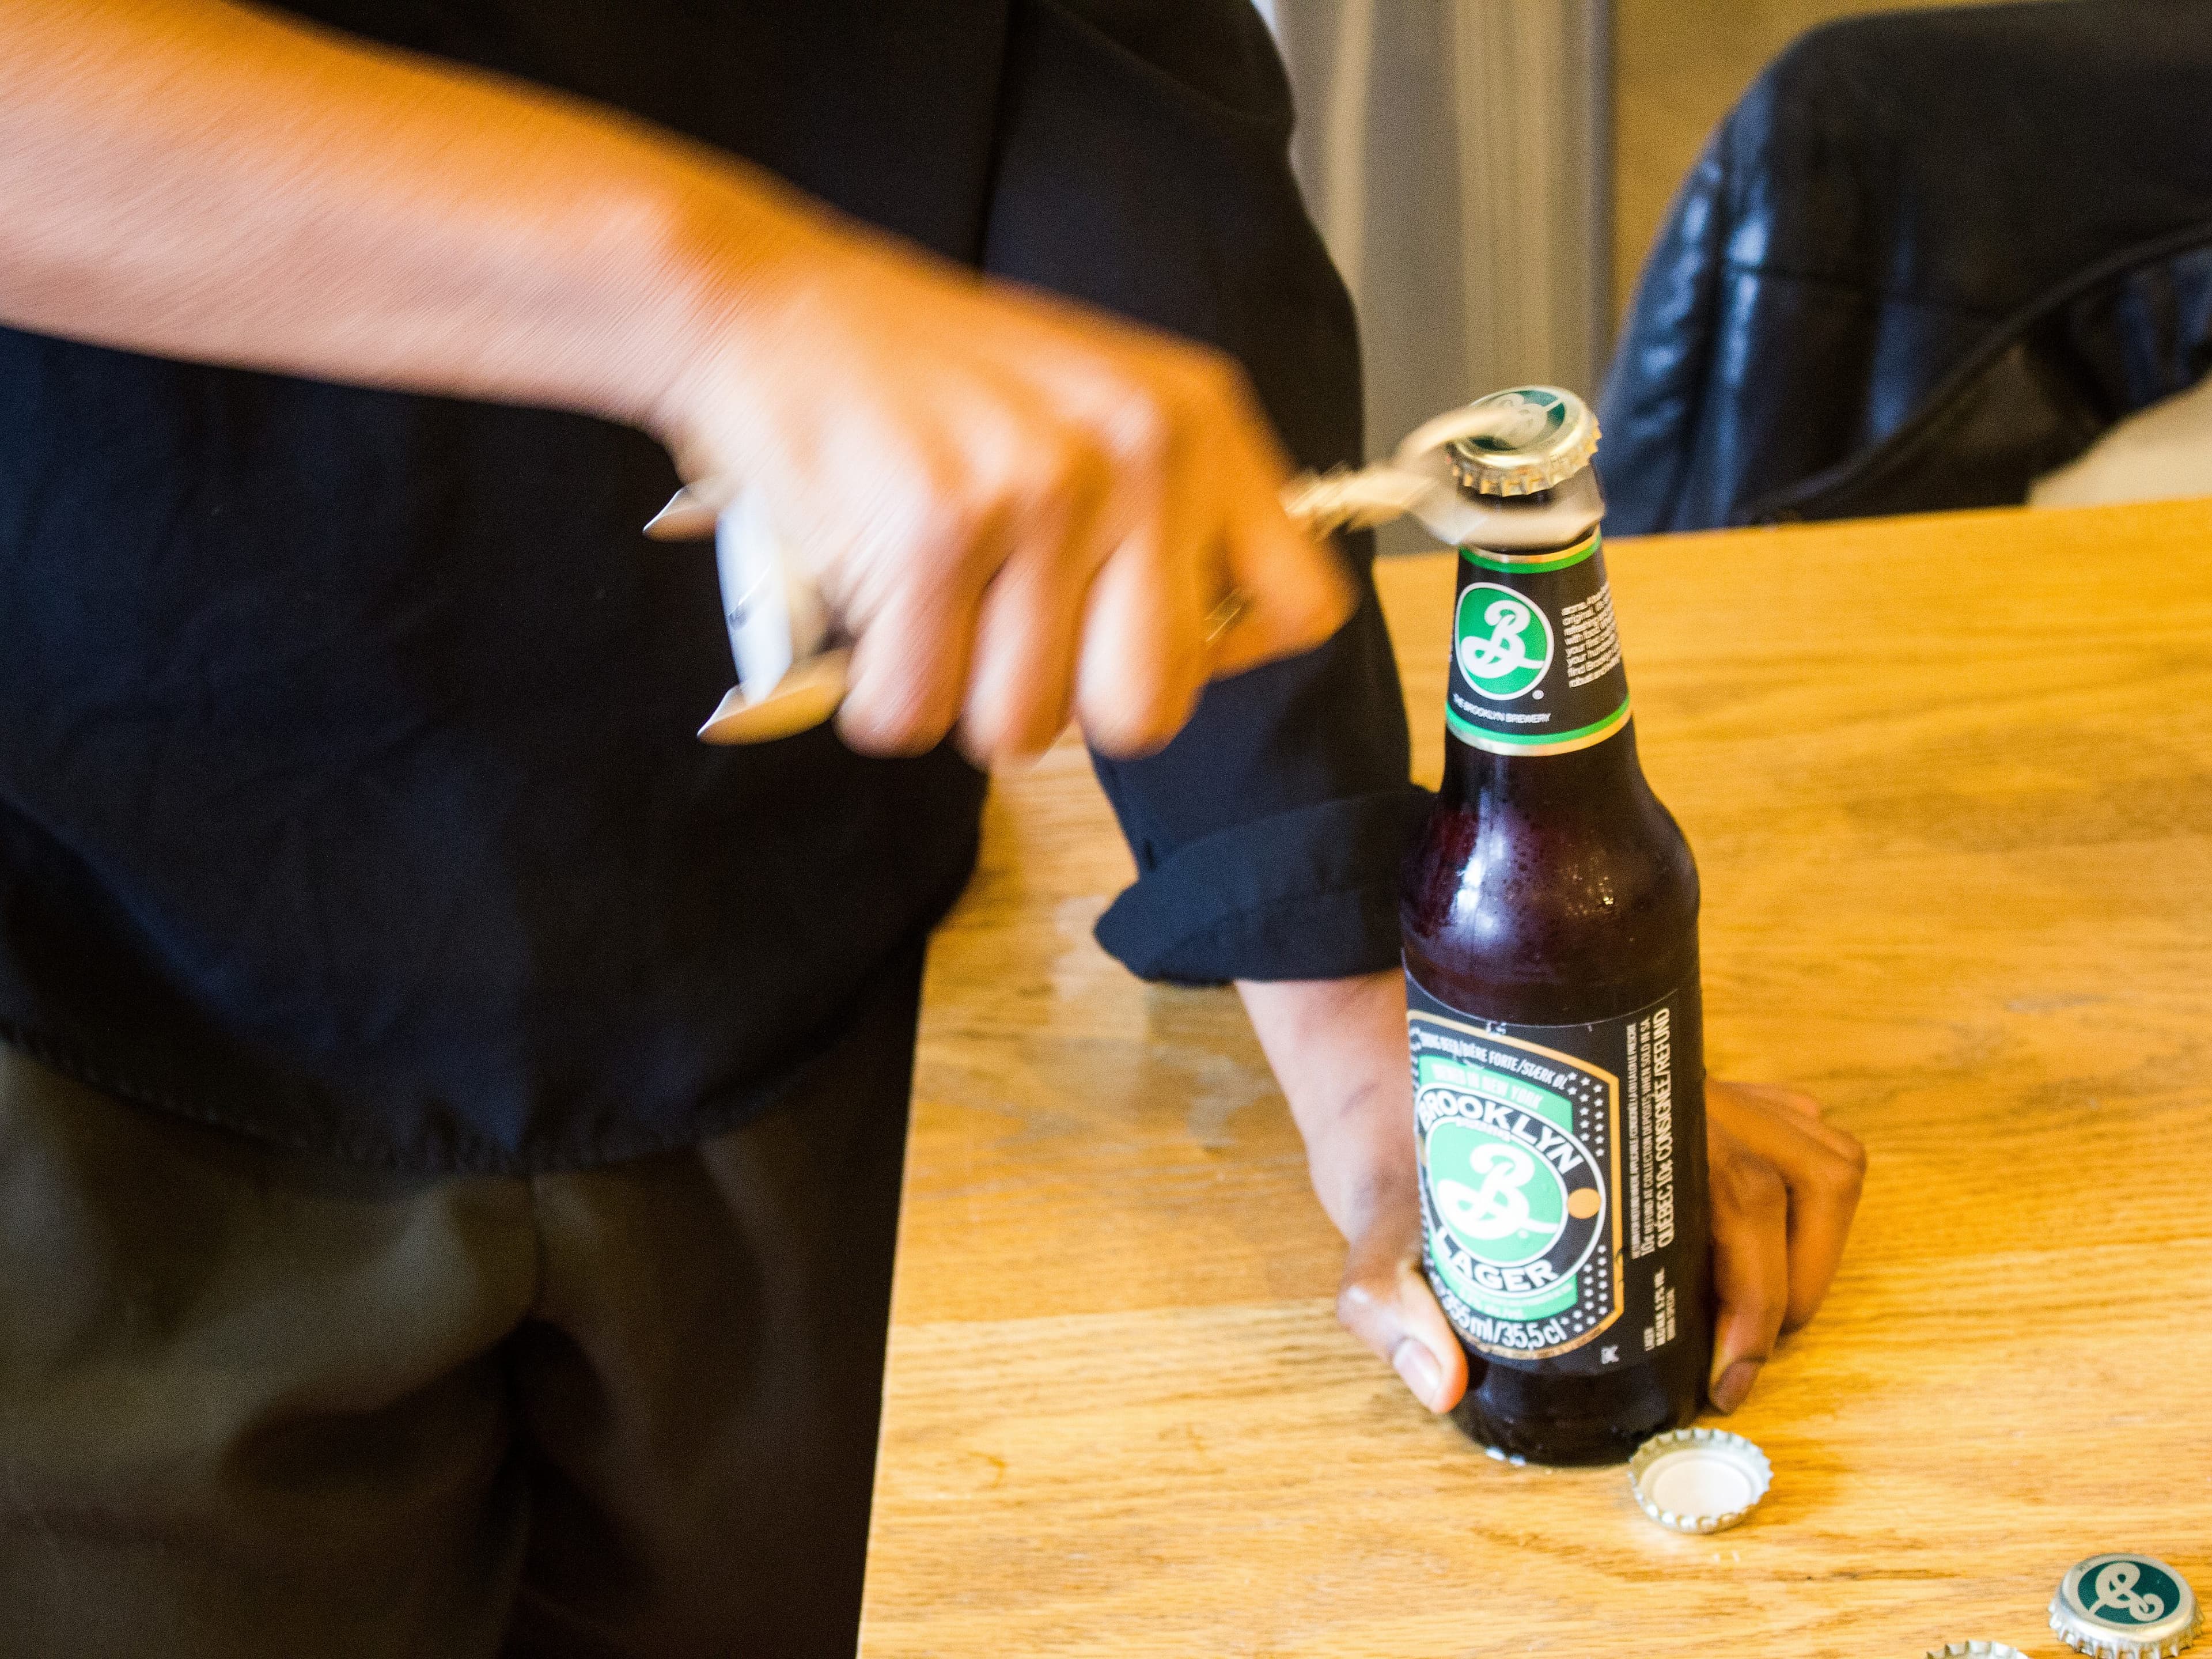 A person is opening a Brooklyn Brewery beer bottle with a bottle opener. The person holds the bottle with one hand on a wooden table, while using the other hand to open it. Several bottle caps are scattered on the table.